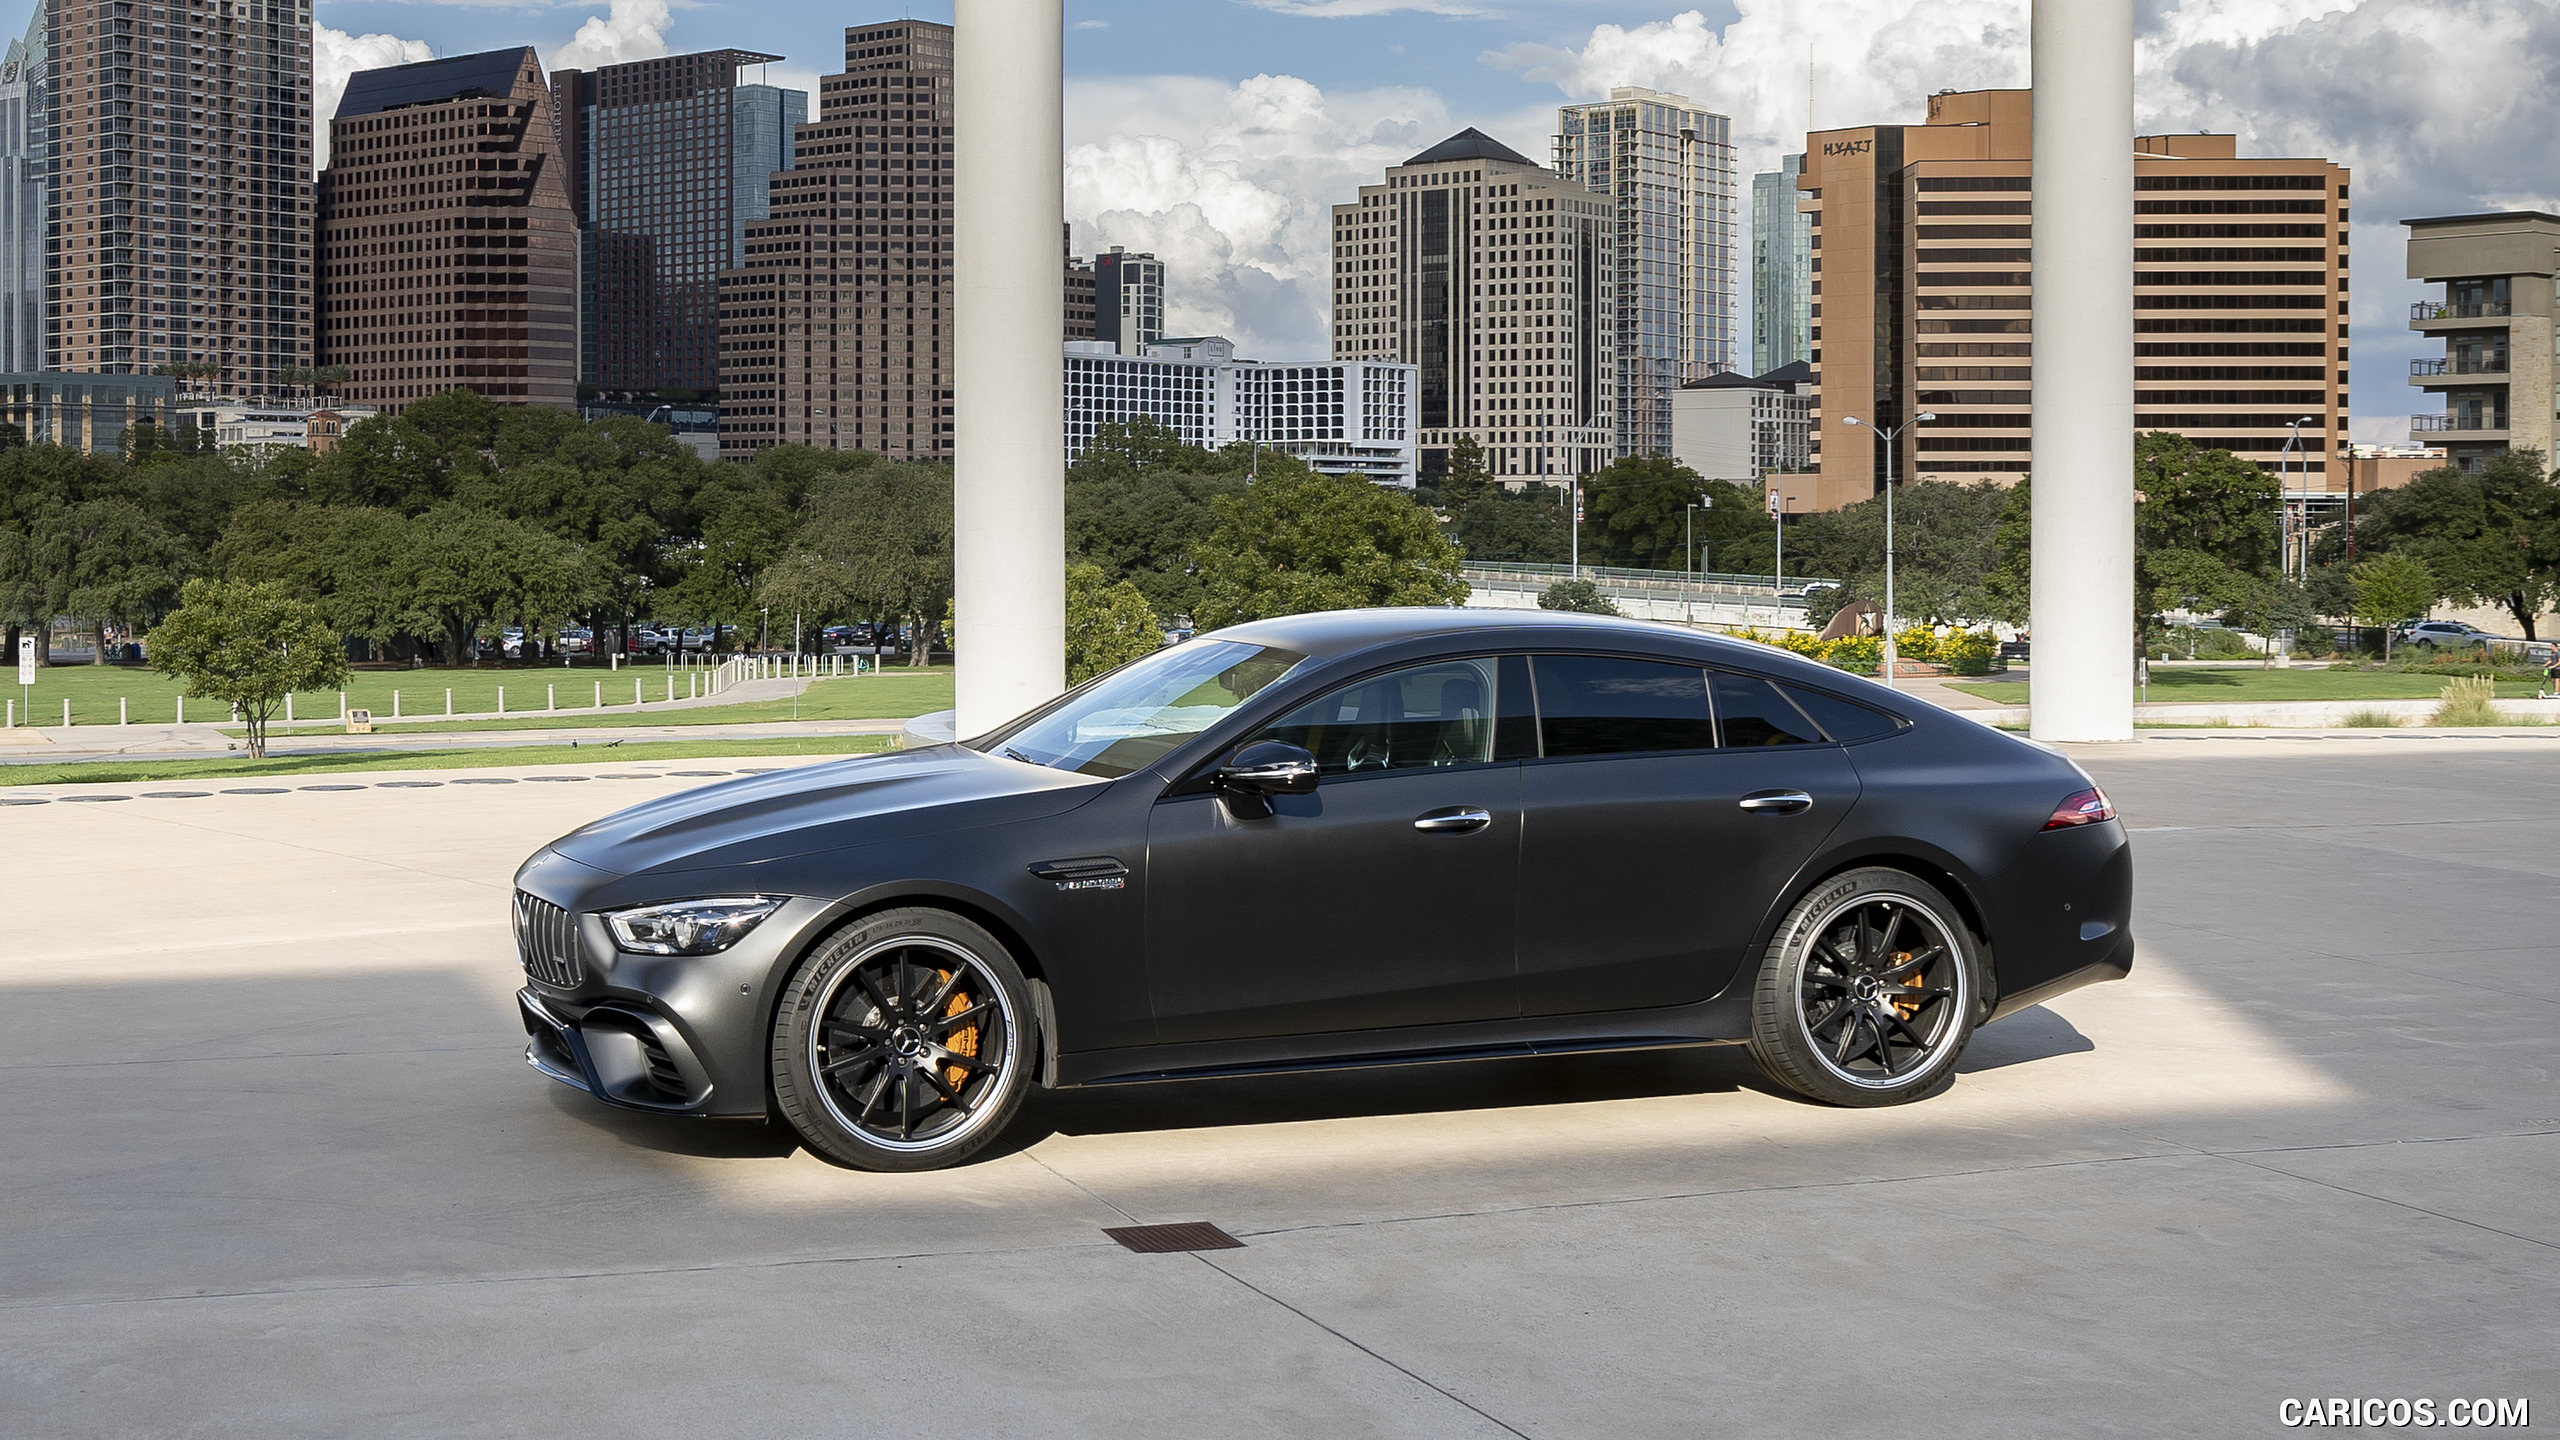 2019 Mercedes-AMG GT 63 S 4MATIC+ 4-Door Coupe - Side, #216 of 427